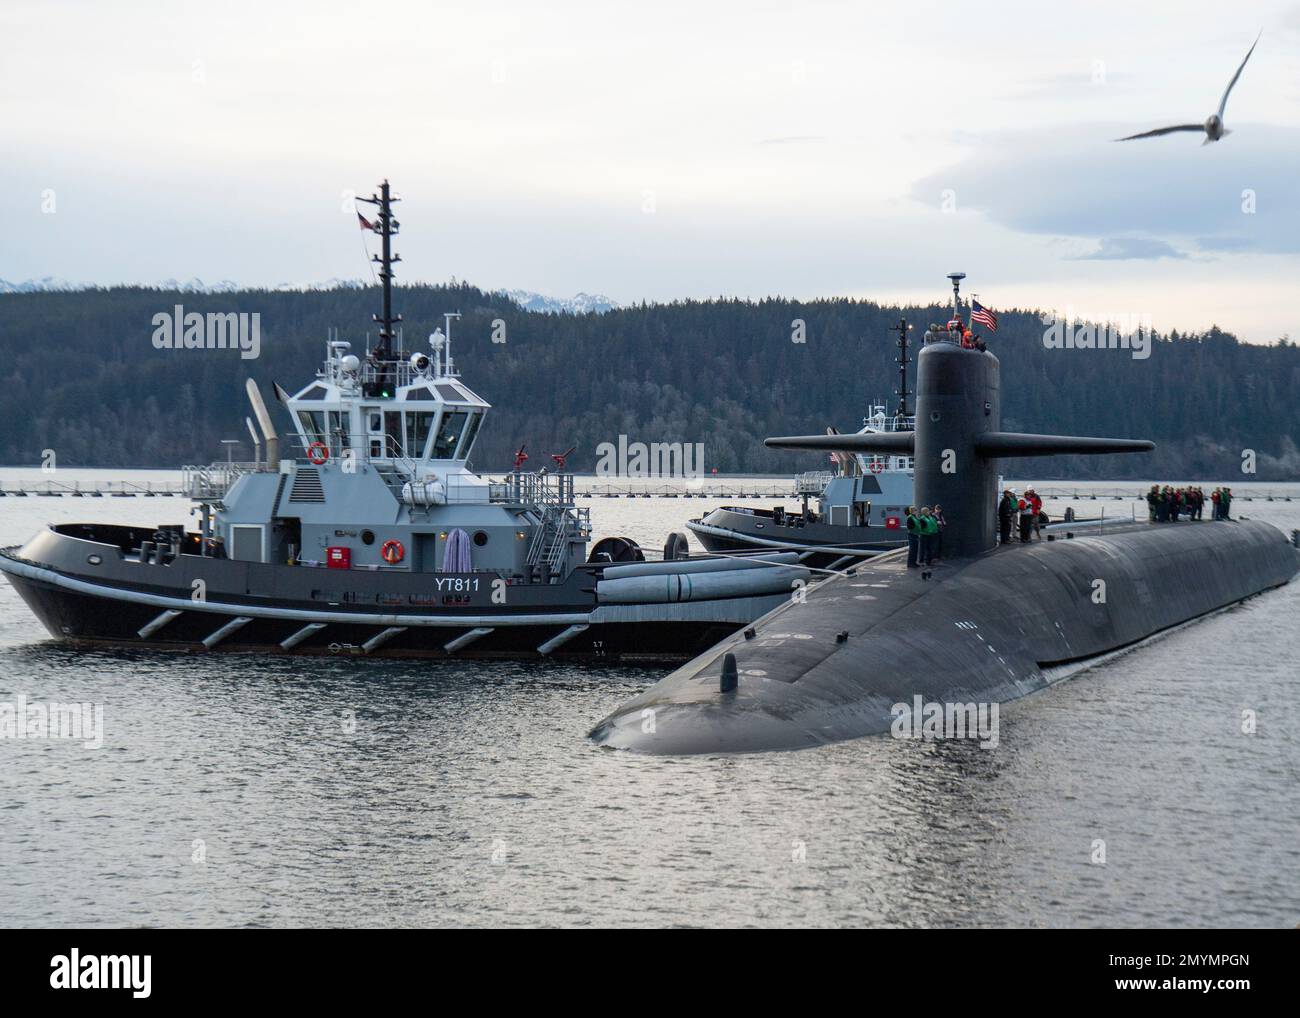 230202-N-CE703-1022    HOOD CANAL, Wash. (Feb. 2, 2023) – The Ohio-class ballistic missile submarine USS Maine (SSBN 741) transits the Hood Canal in preparation to moor at Naval Base Kitsap – Bangor, Washington, Feb. 3, 2023. Maine is one of eight ballistic-missile submarines stationed at Naval Base Kitsap-Bangor, providing the most survivable leg of the strategic deterrence triad for the United States. (U.S. Navy photo by Mass Communication Specialist 2nd Class Ian Zagrocki) Stock Photo